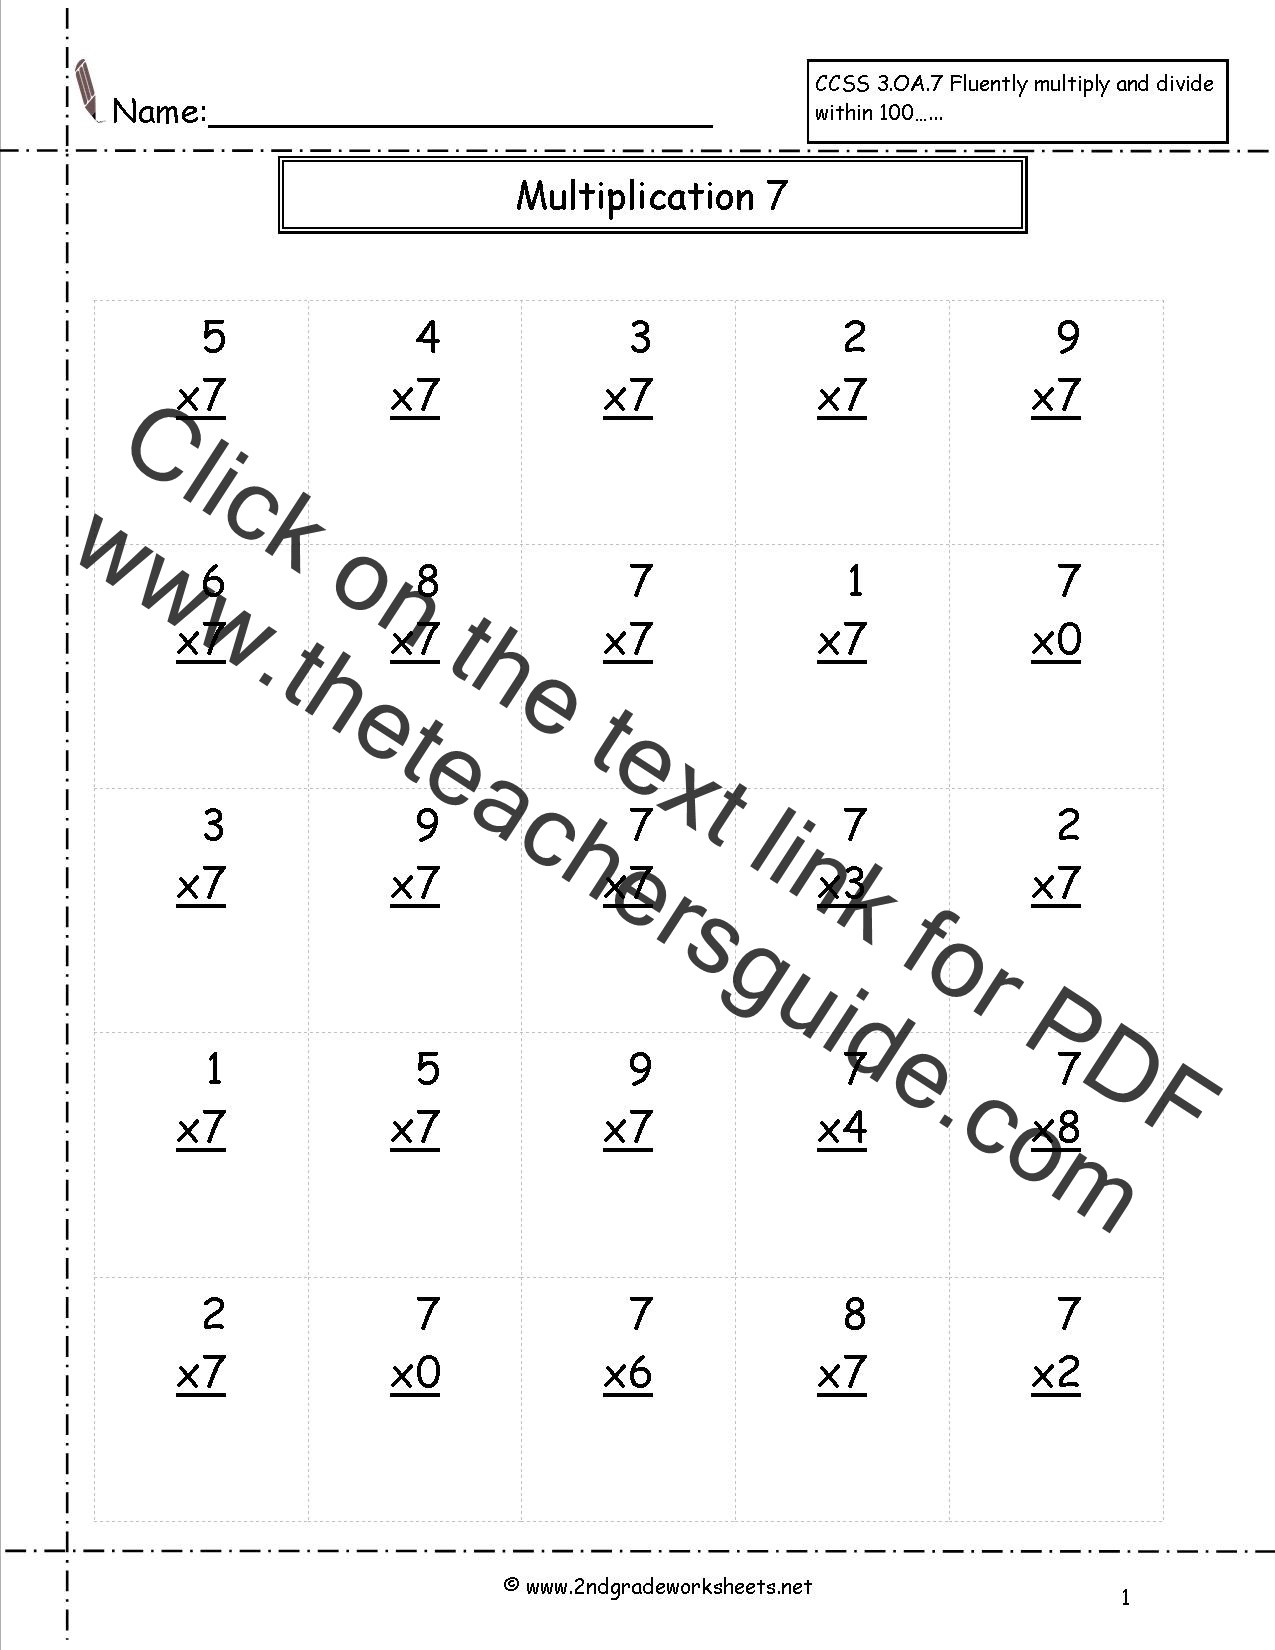 multiplication-practice-sheets-printable-worksheets-multiplication-worksheets-pdf-grade-234